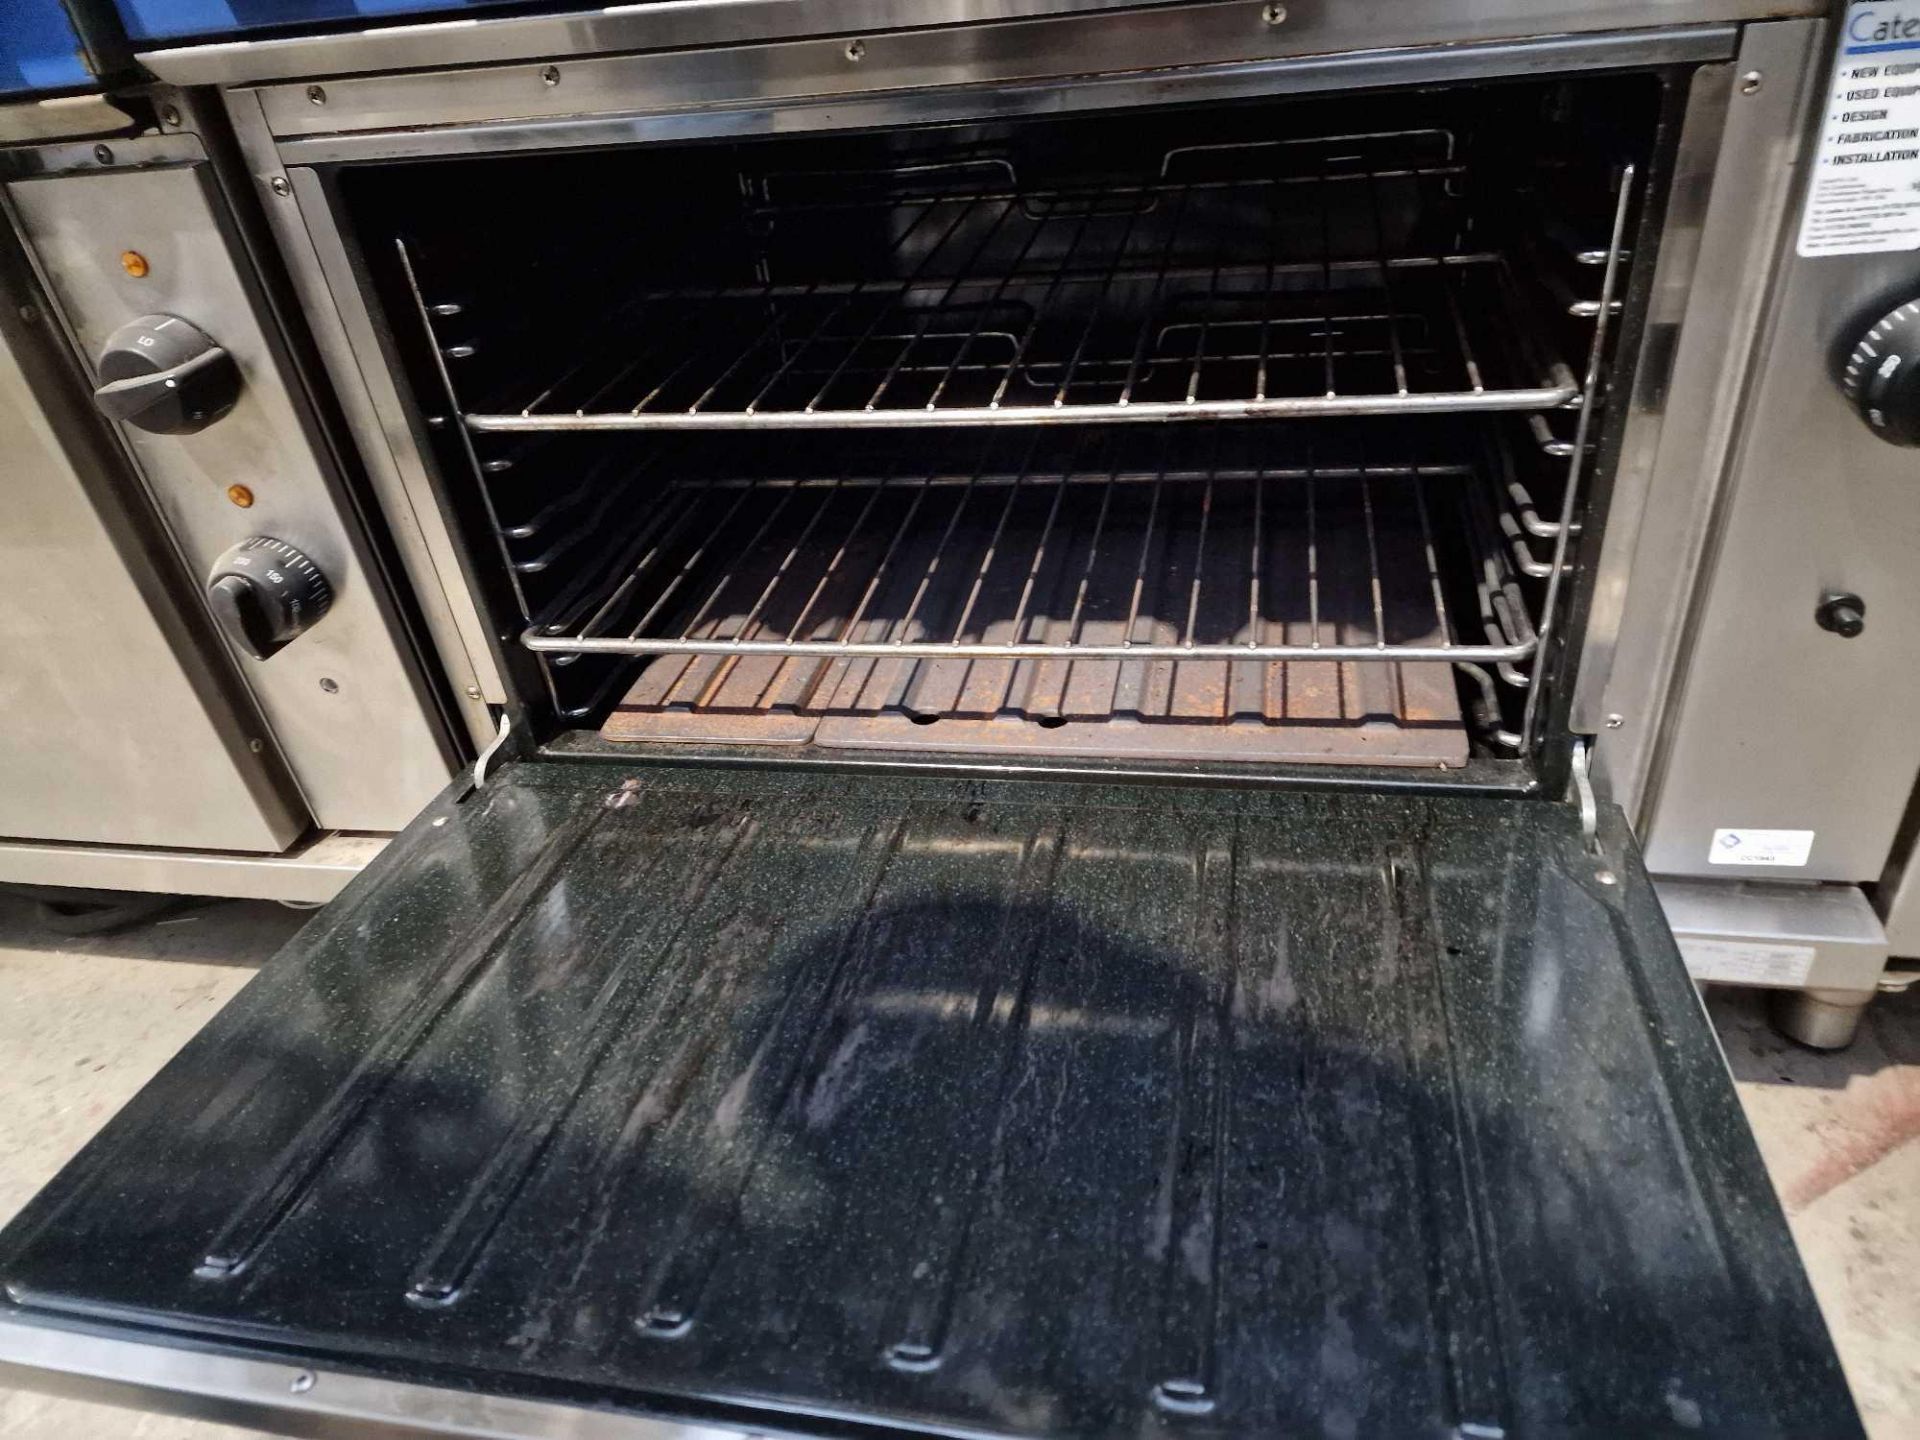 Blue Seal Stainless Steel 6 Gas Burners with oven - The heavy duty, stainless steel Blue Seal - Image 3 of 4